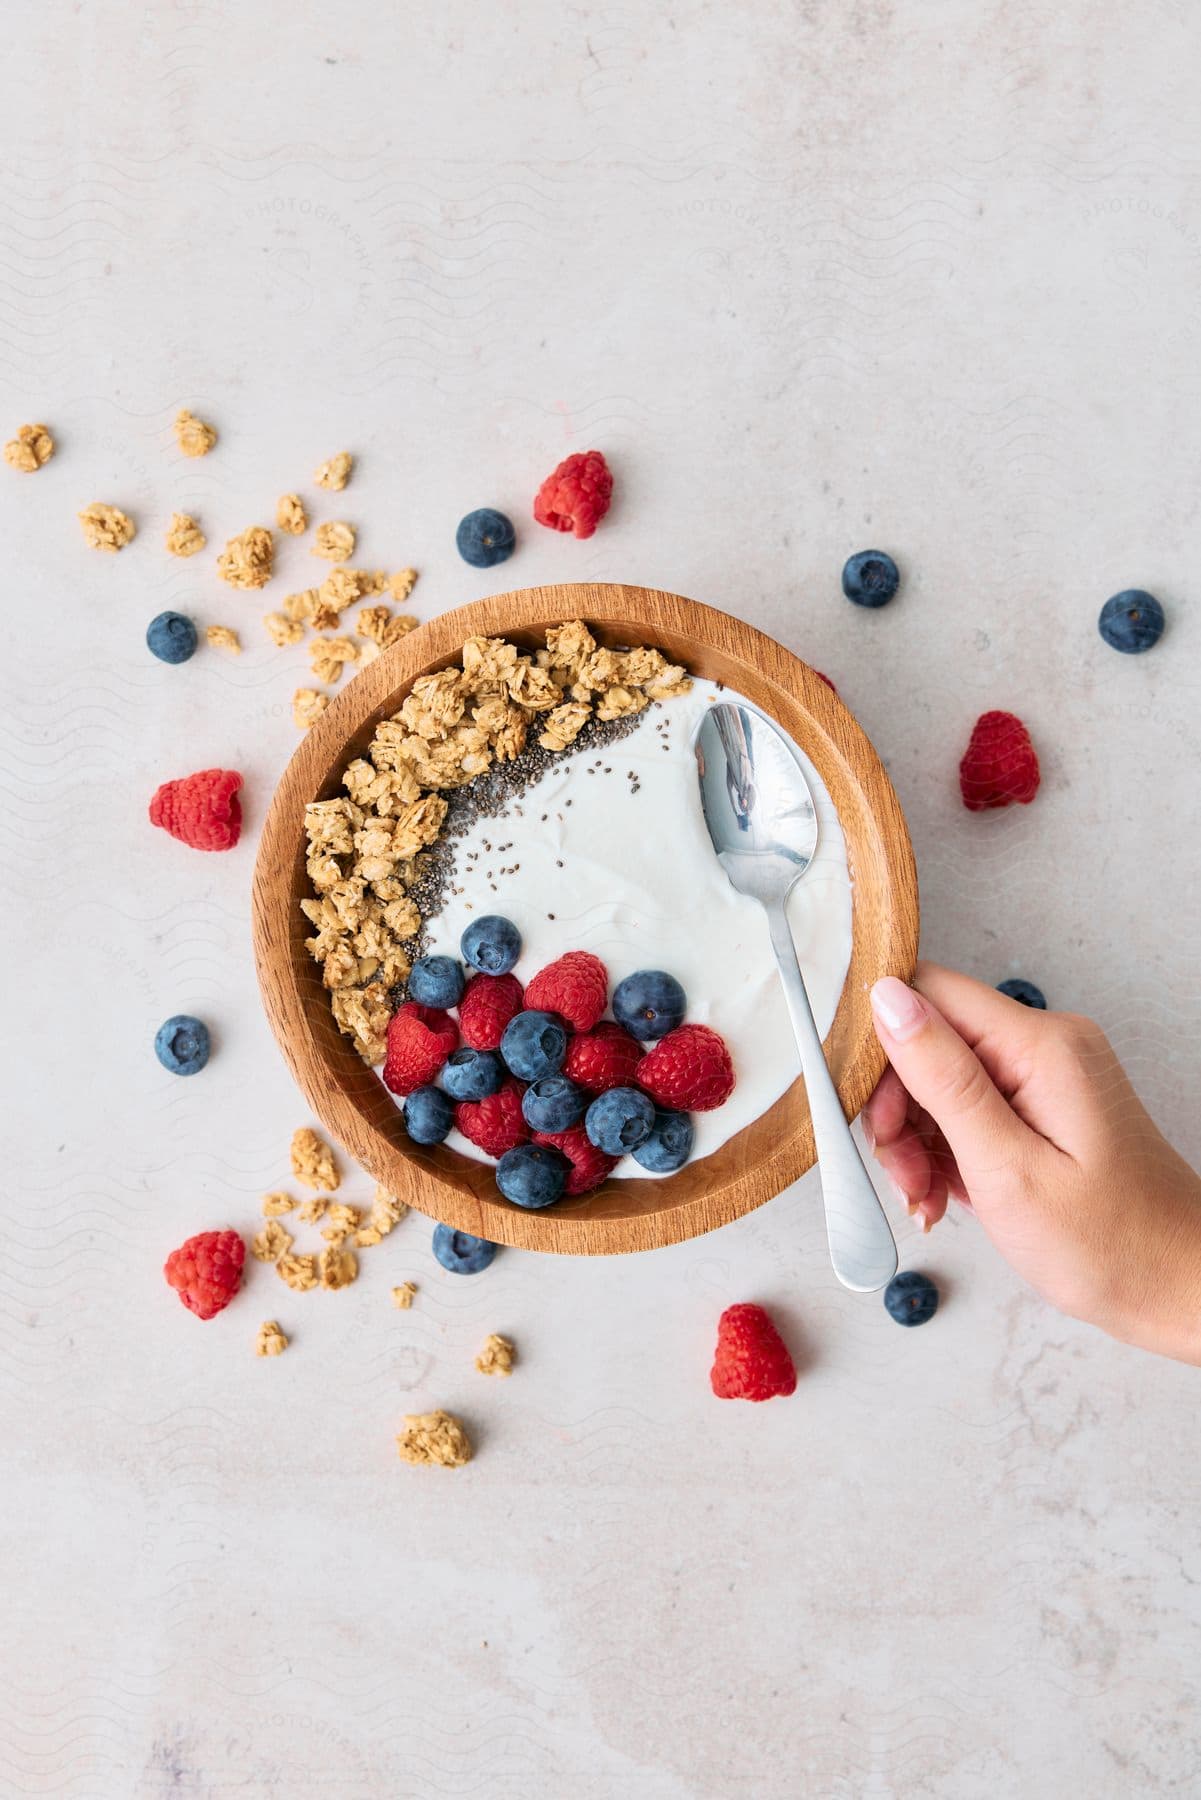 Stock photo of a woman's hand touches a bowl of granola, yogurt and fresh berries.